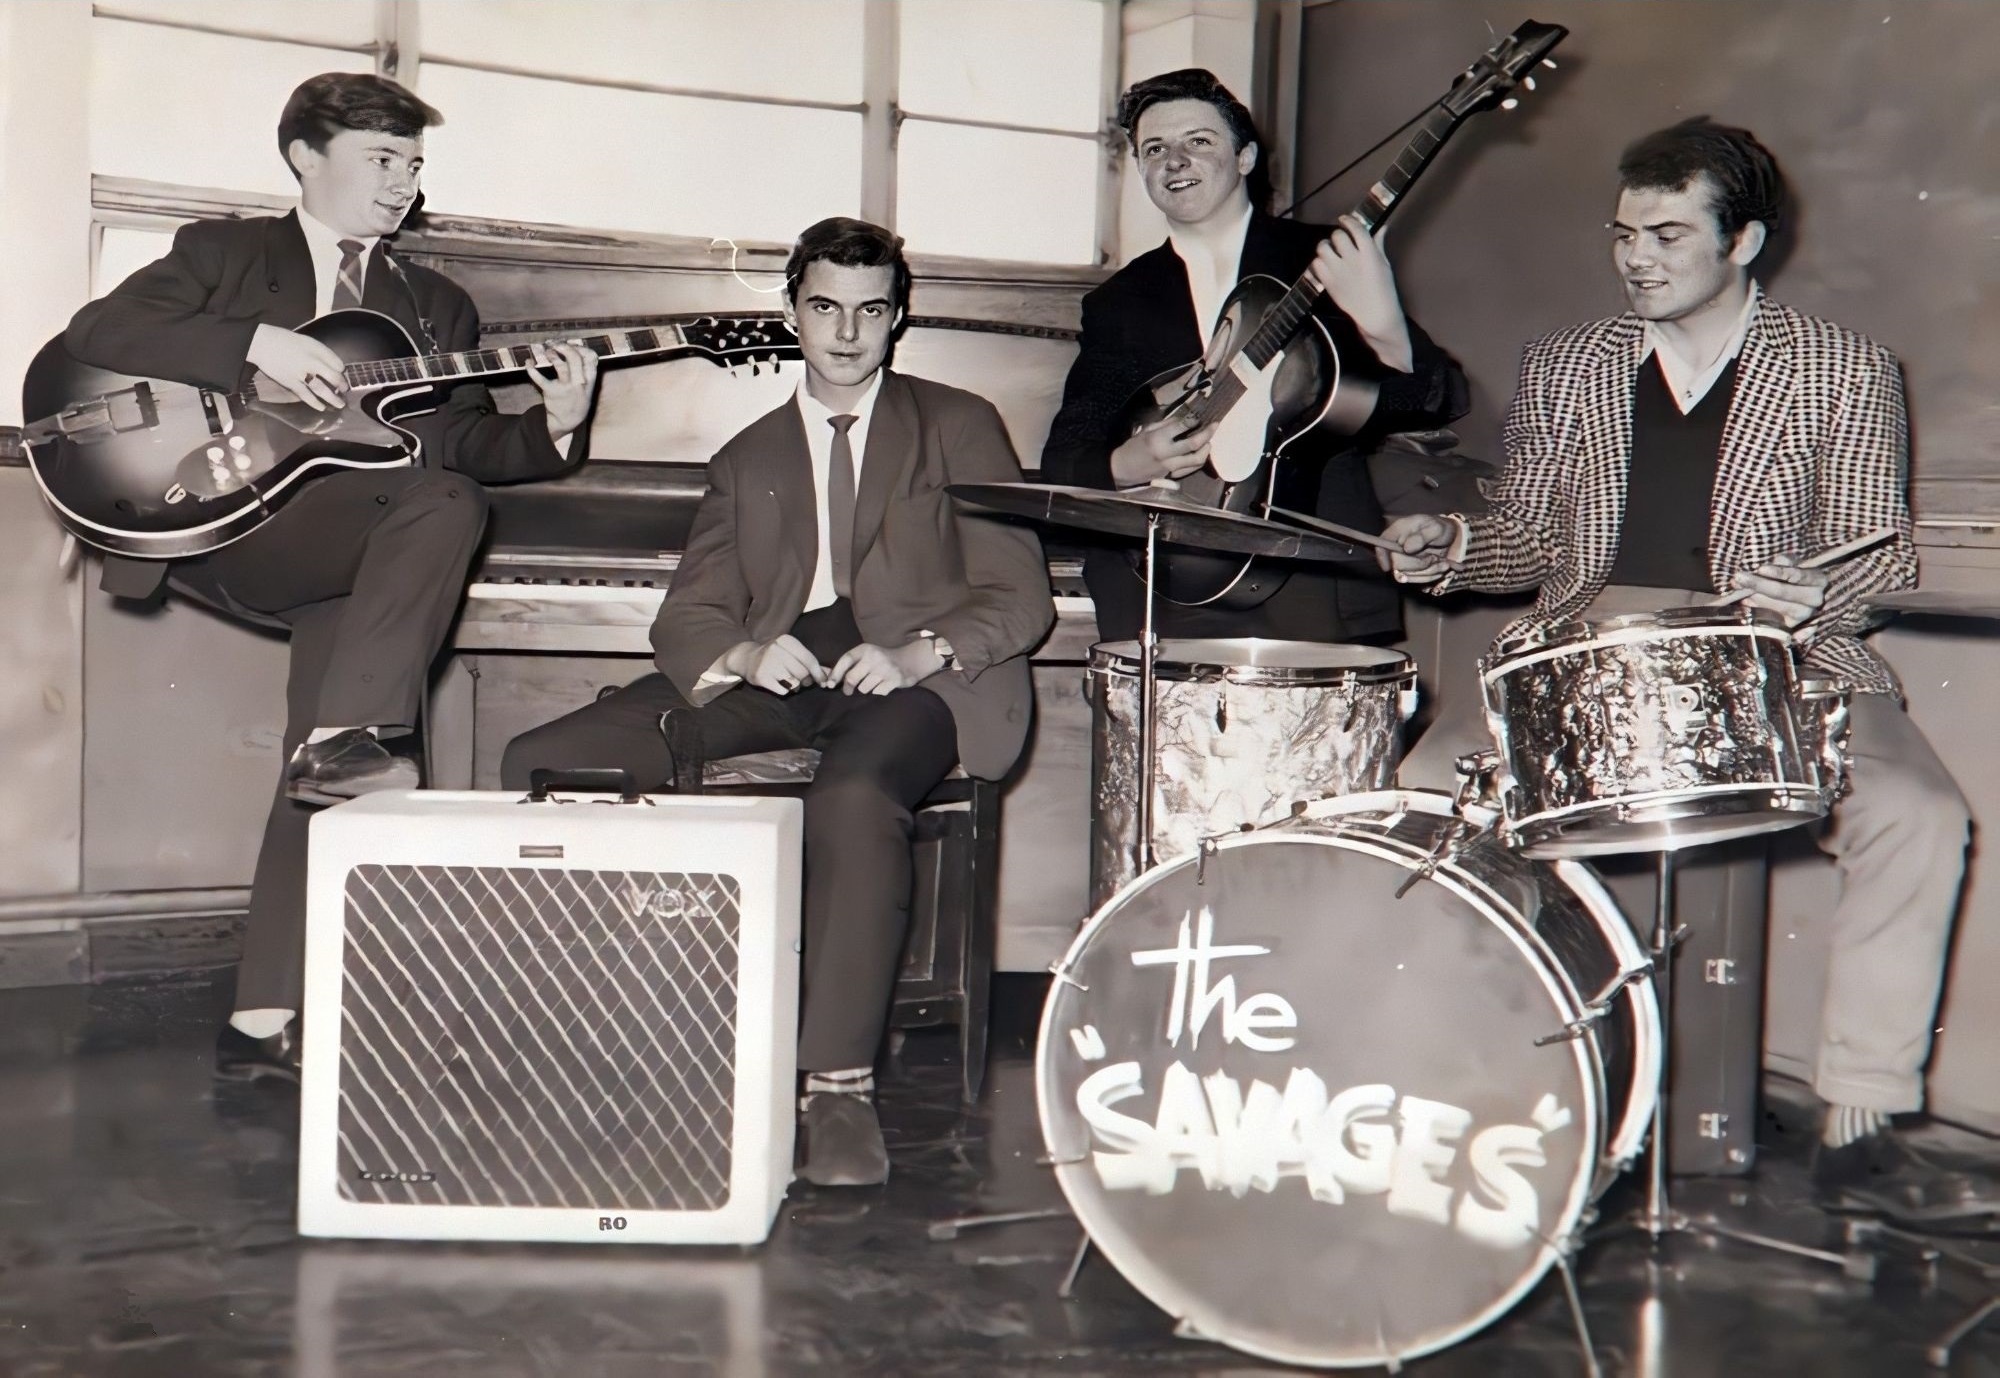 Nicky Hopkins with the Savages in 1960